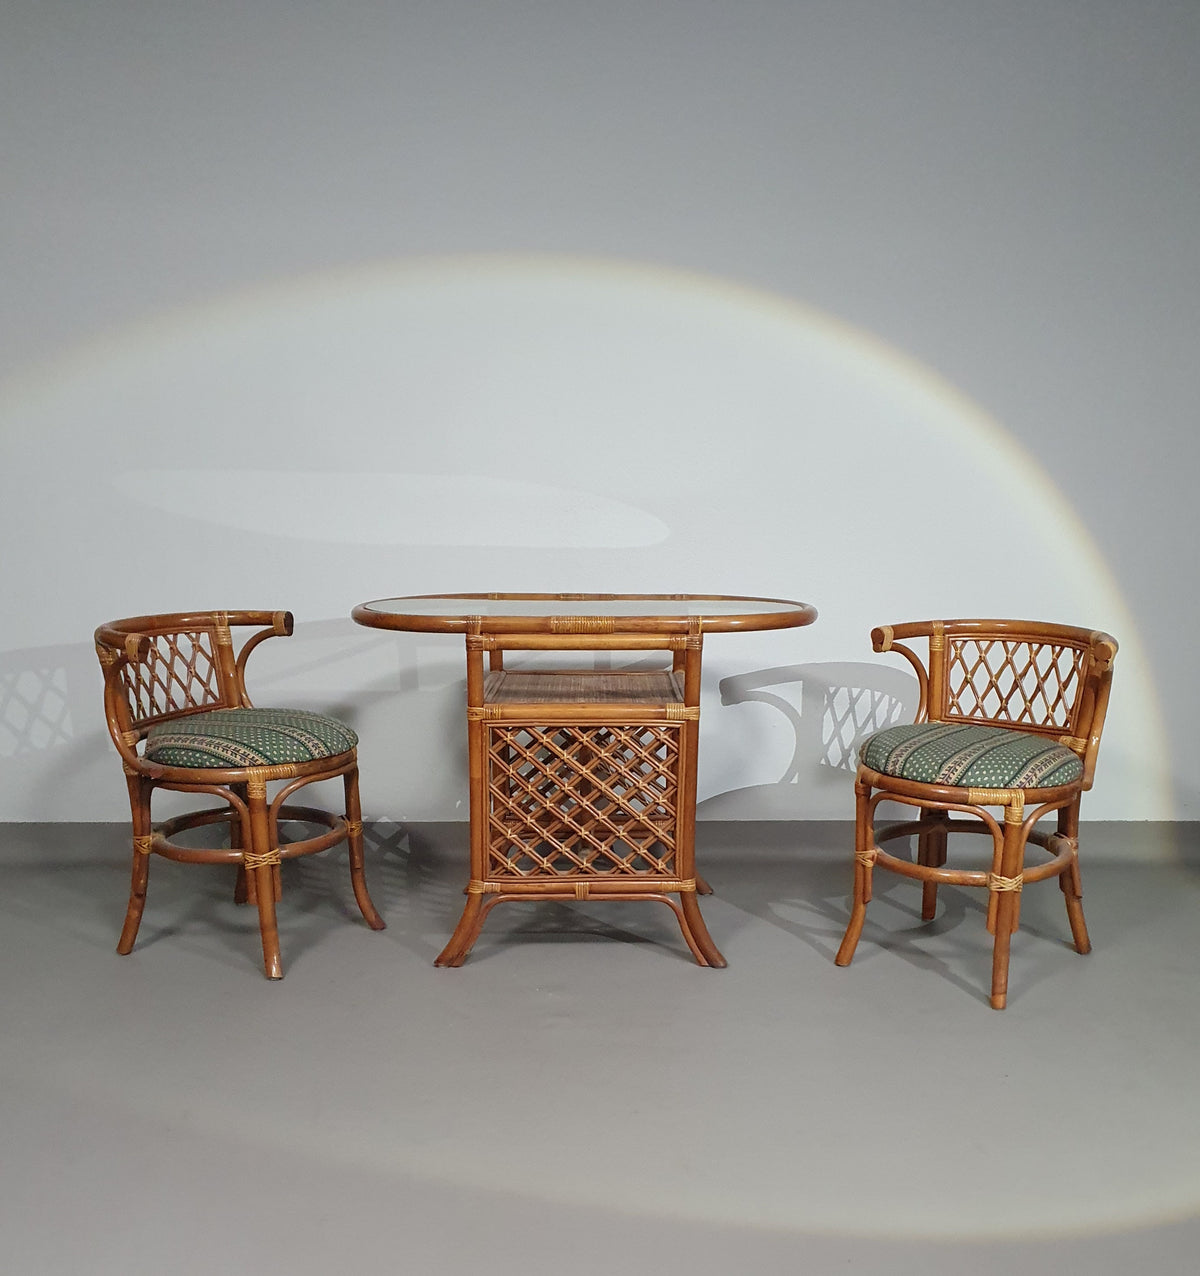 Rattan / bamboo Balcony side table / chairs set 1970s.